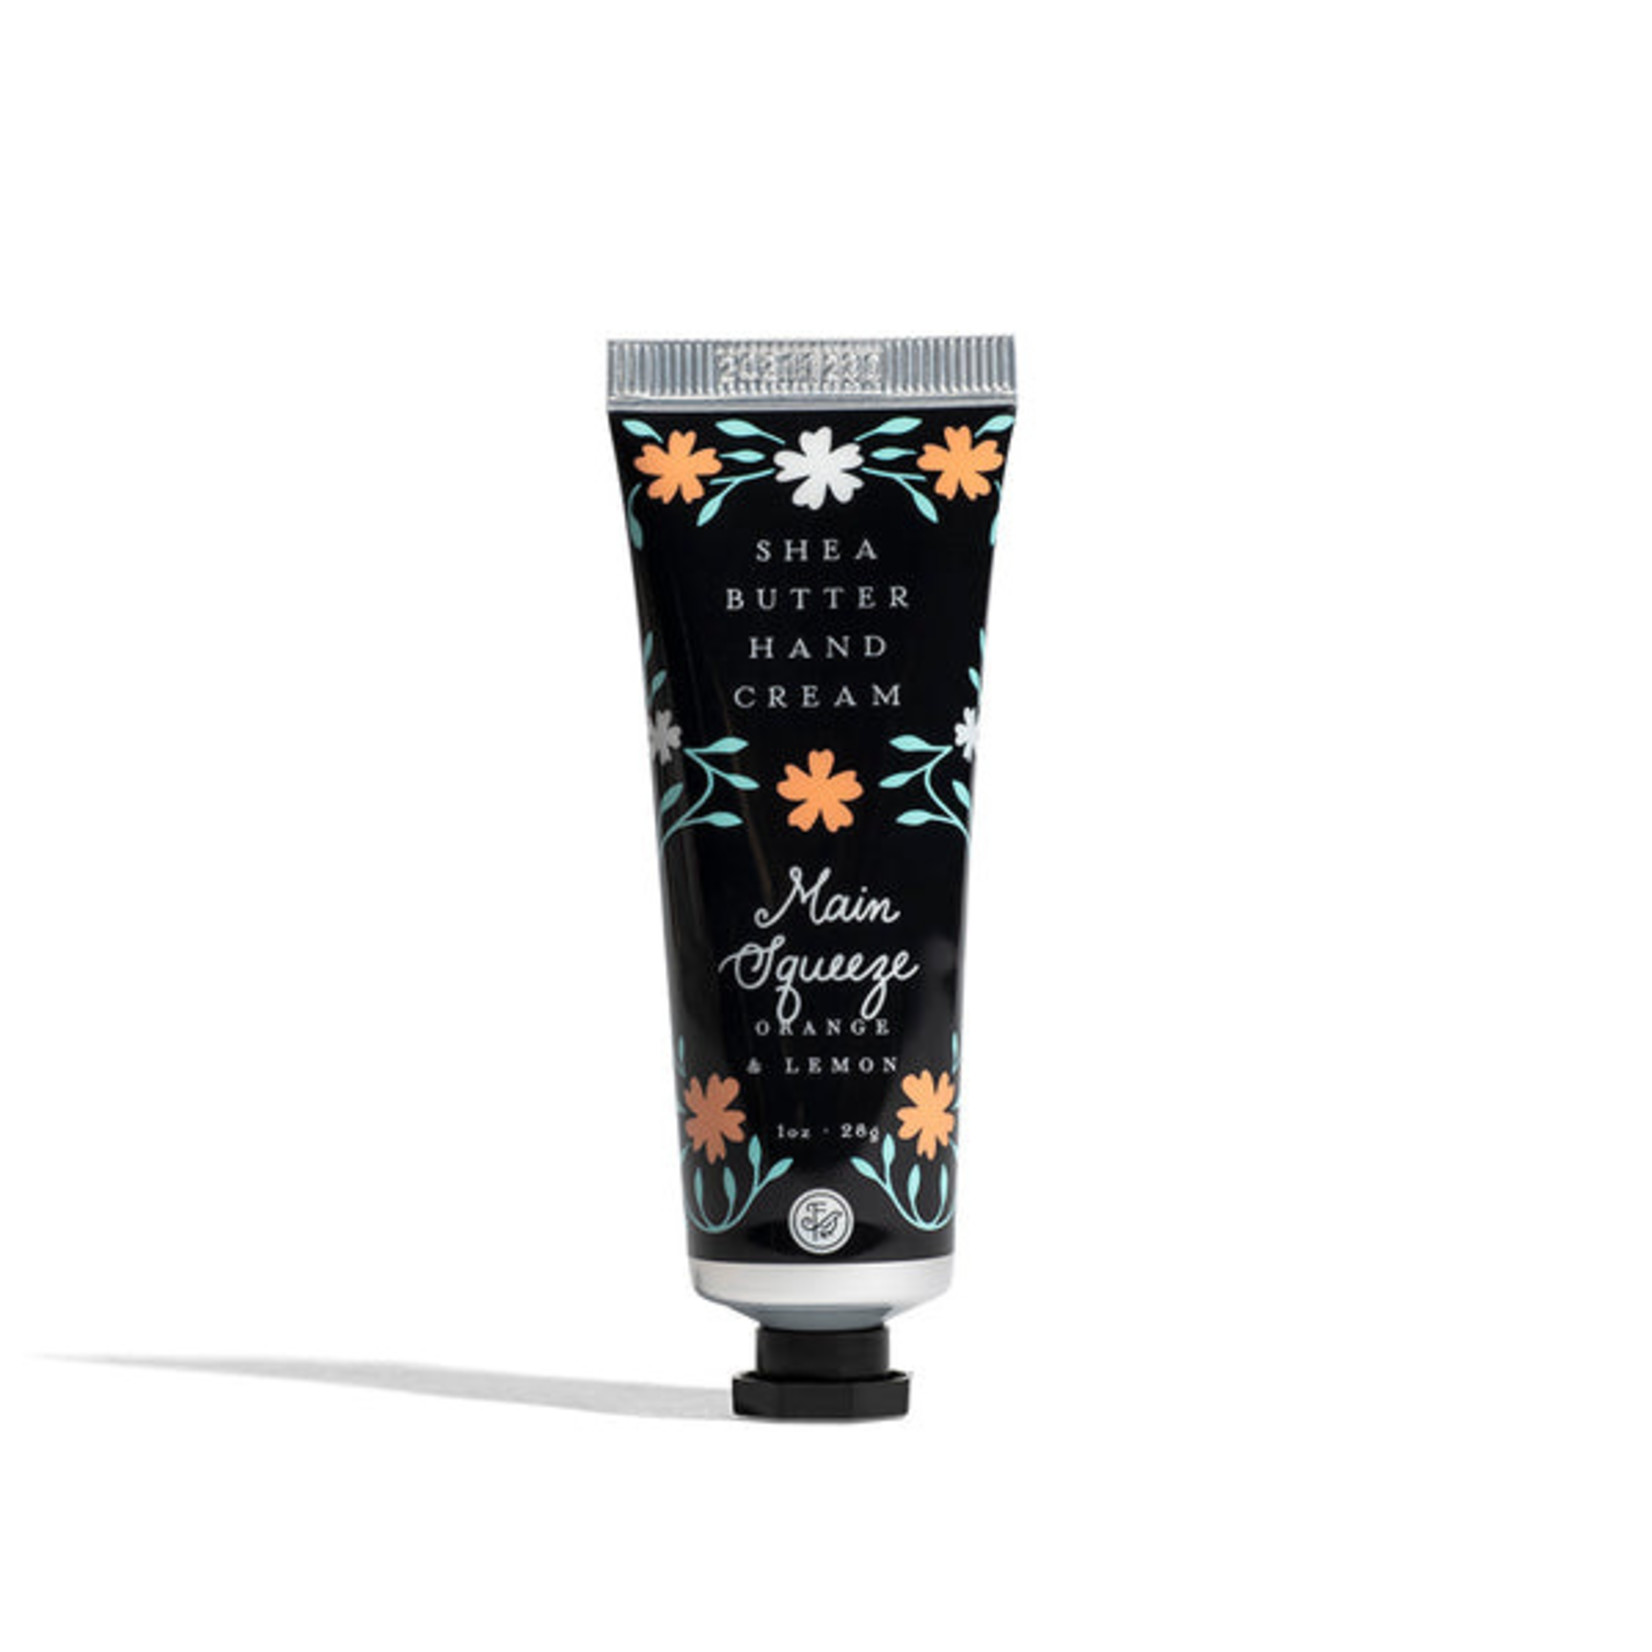 Finch Berry Travel Hand Cream- Main Squeeze